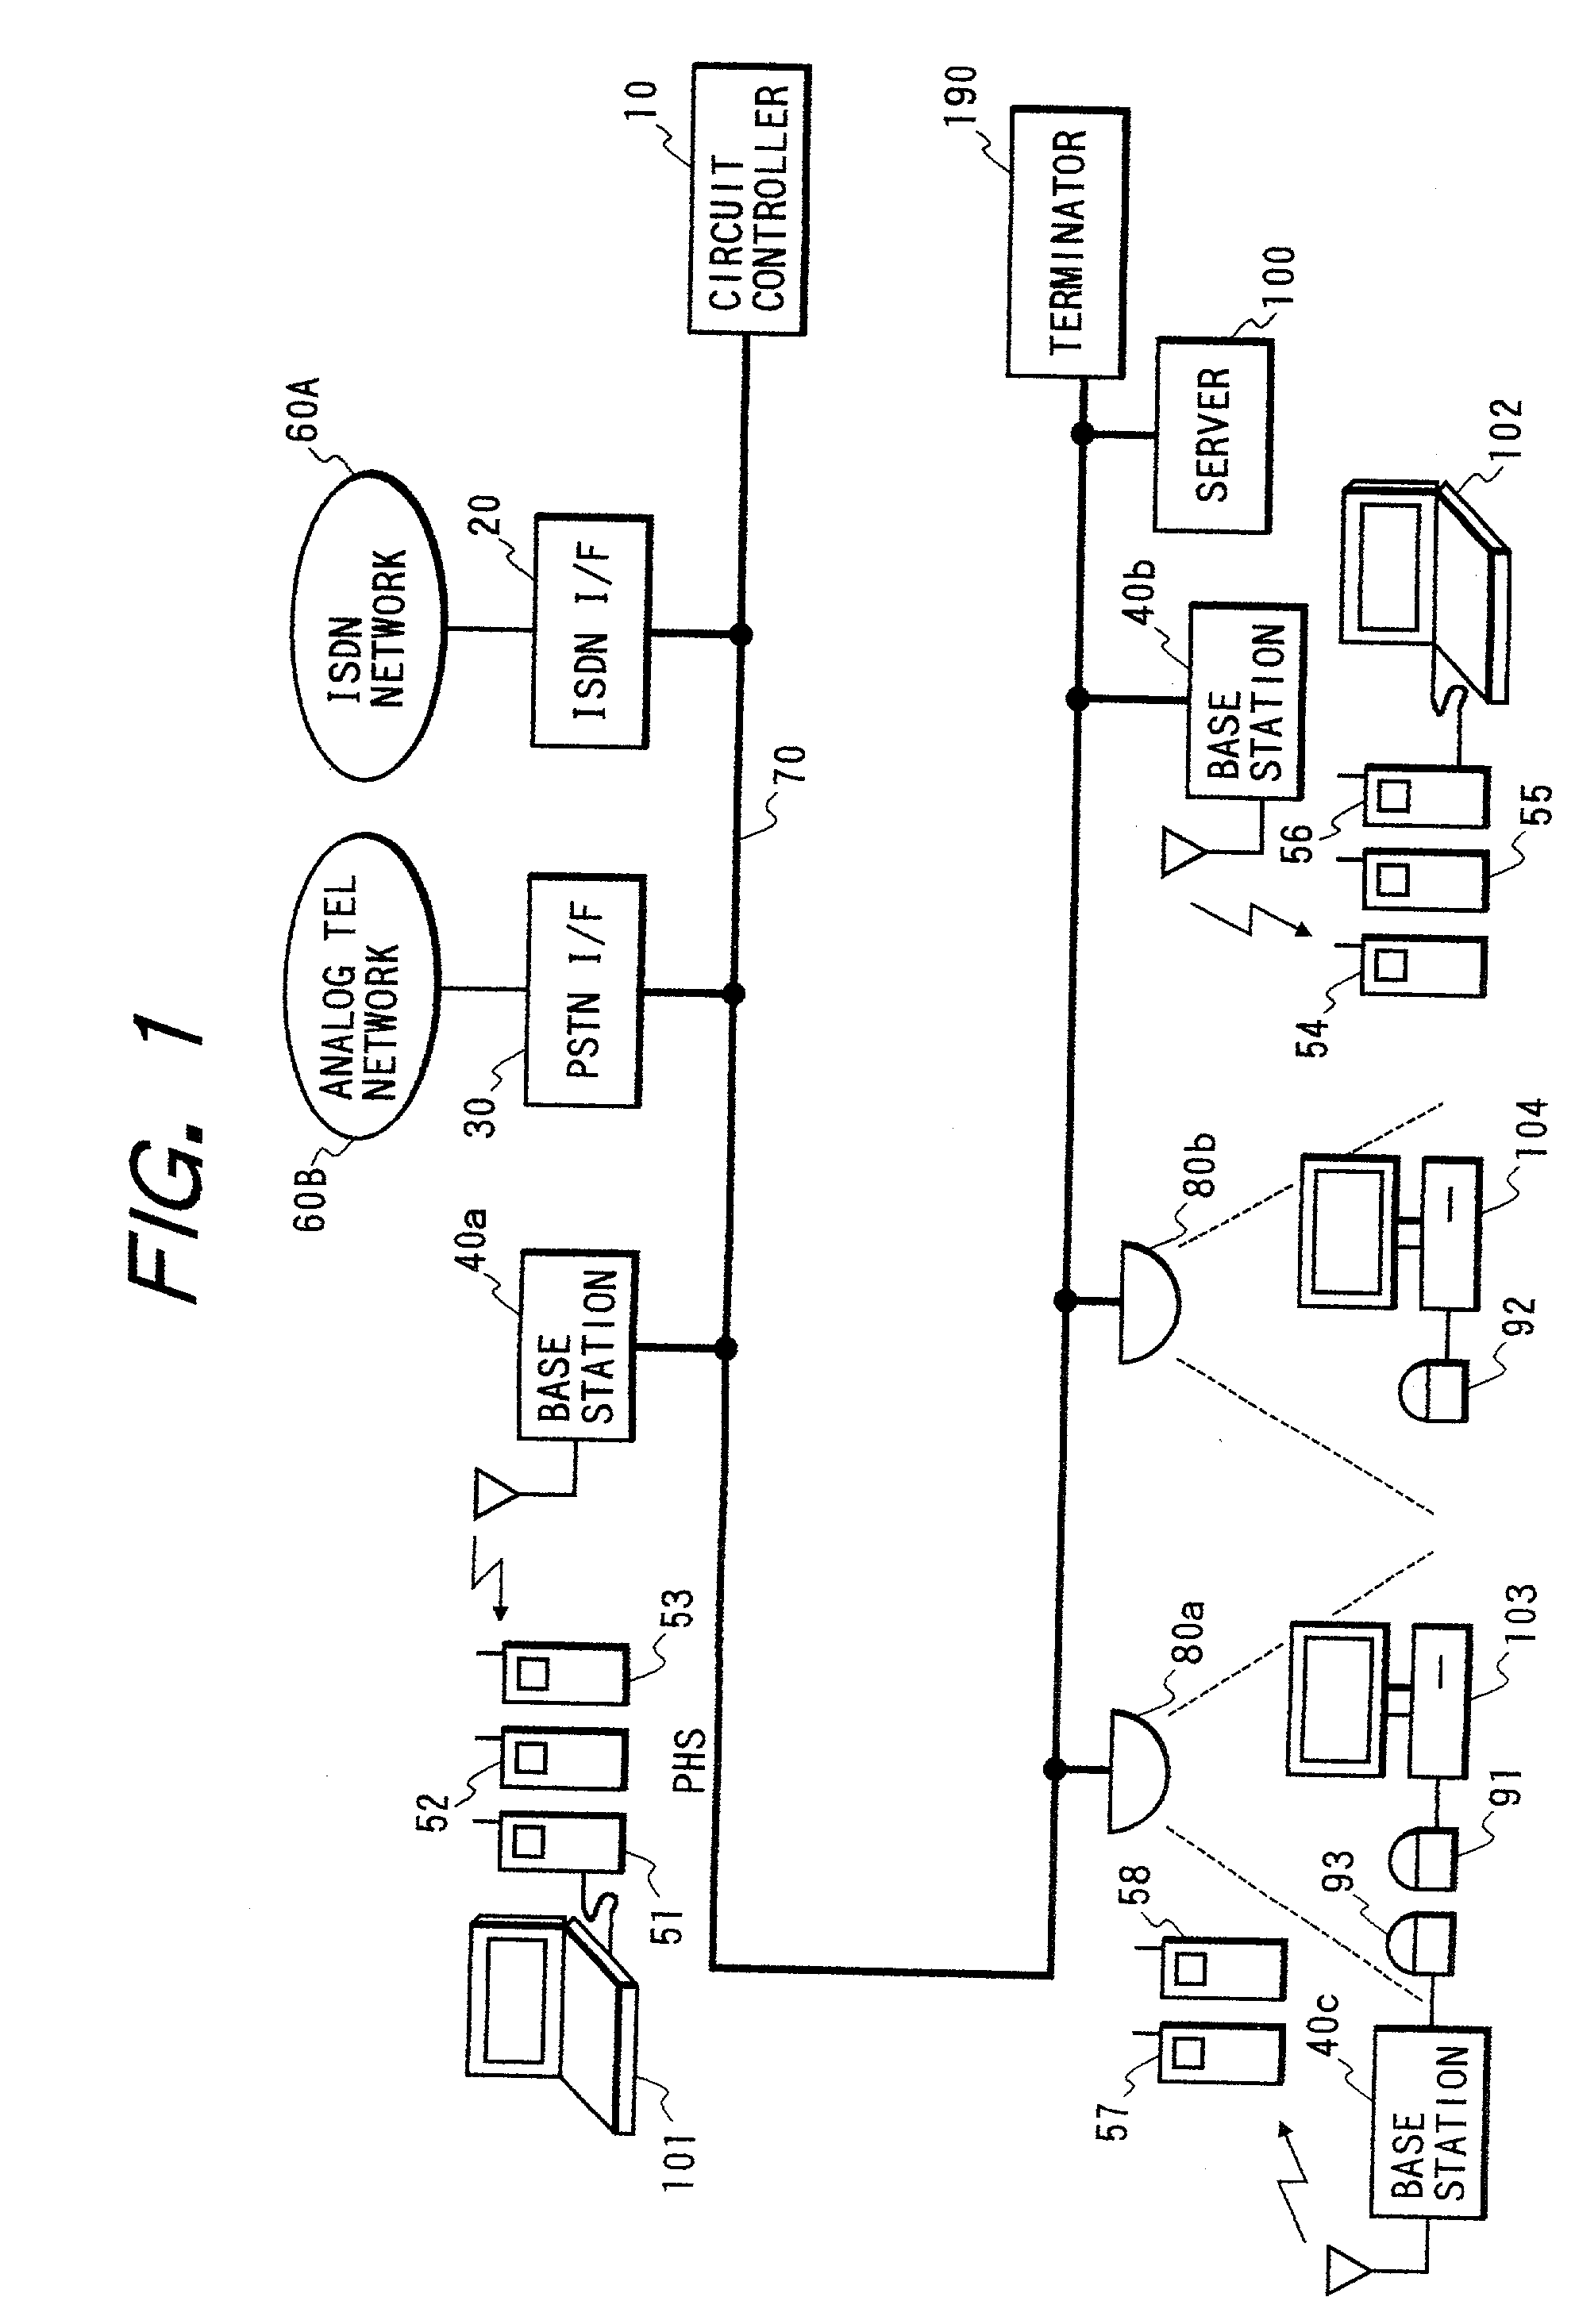 Communication system and circuit controller